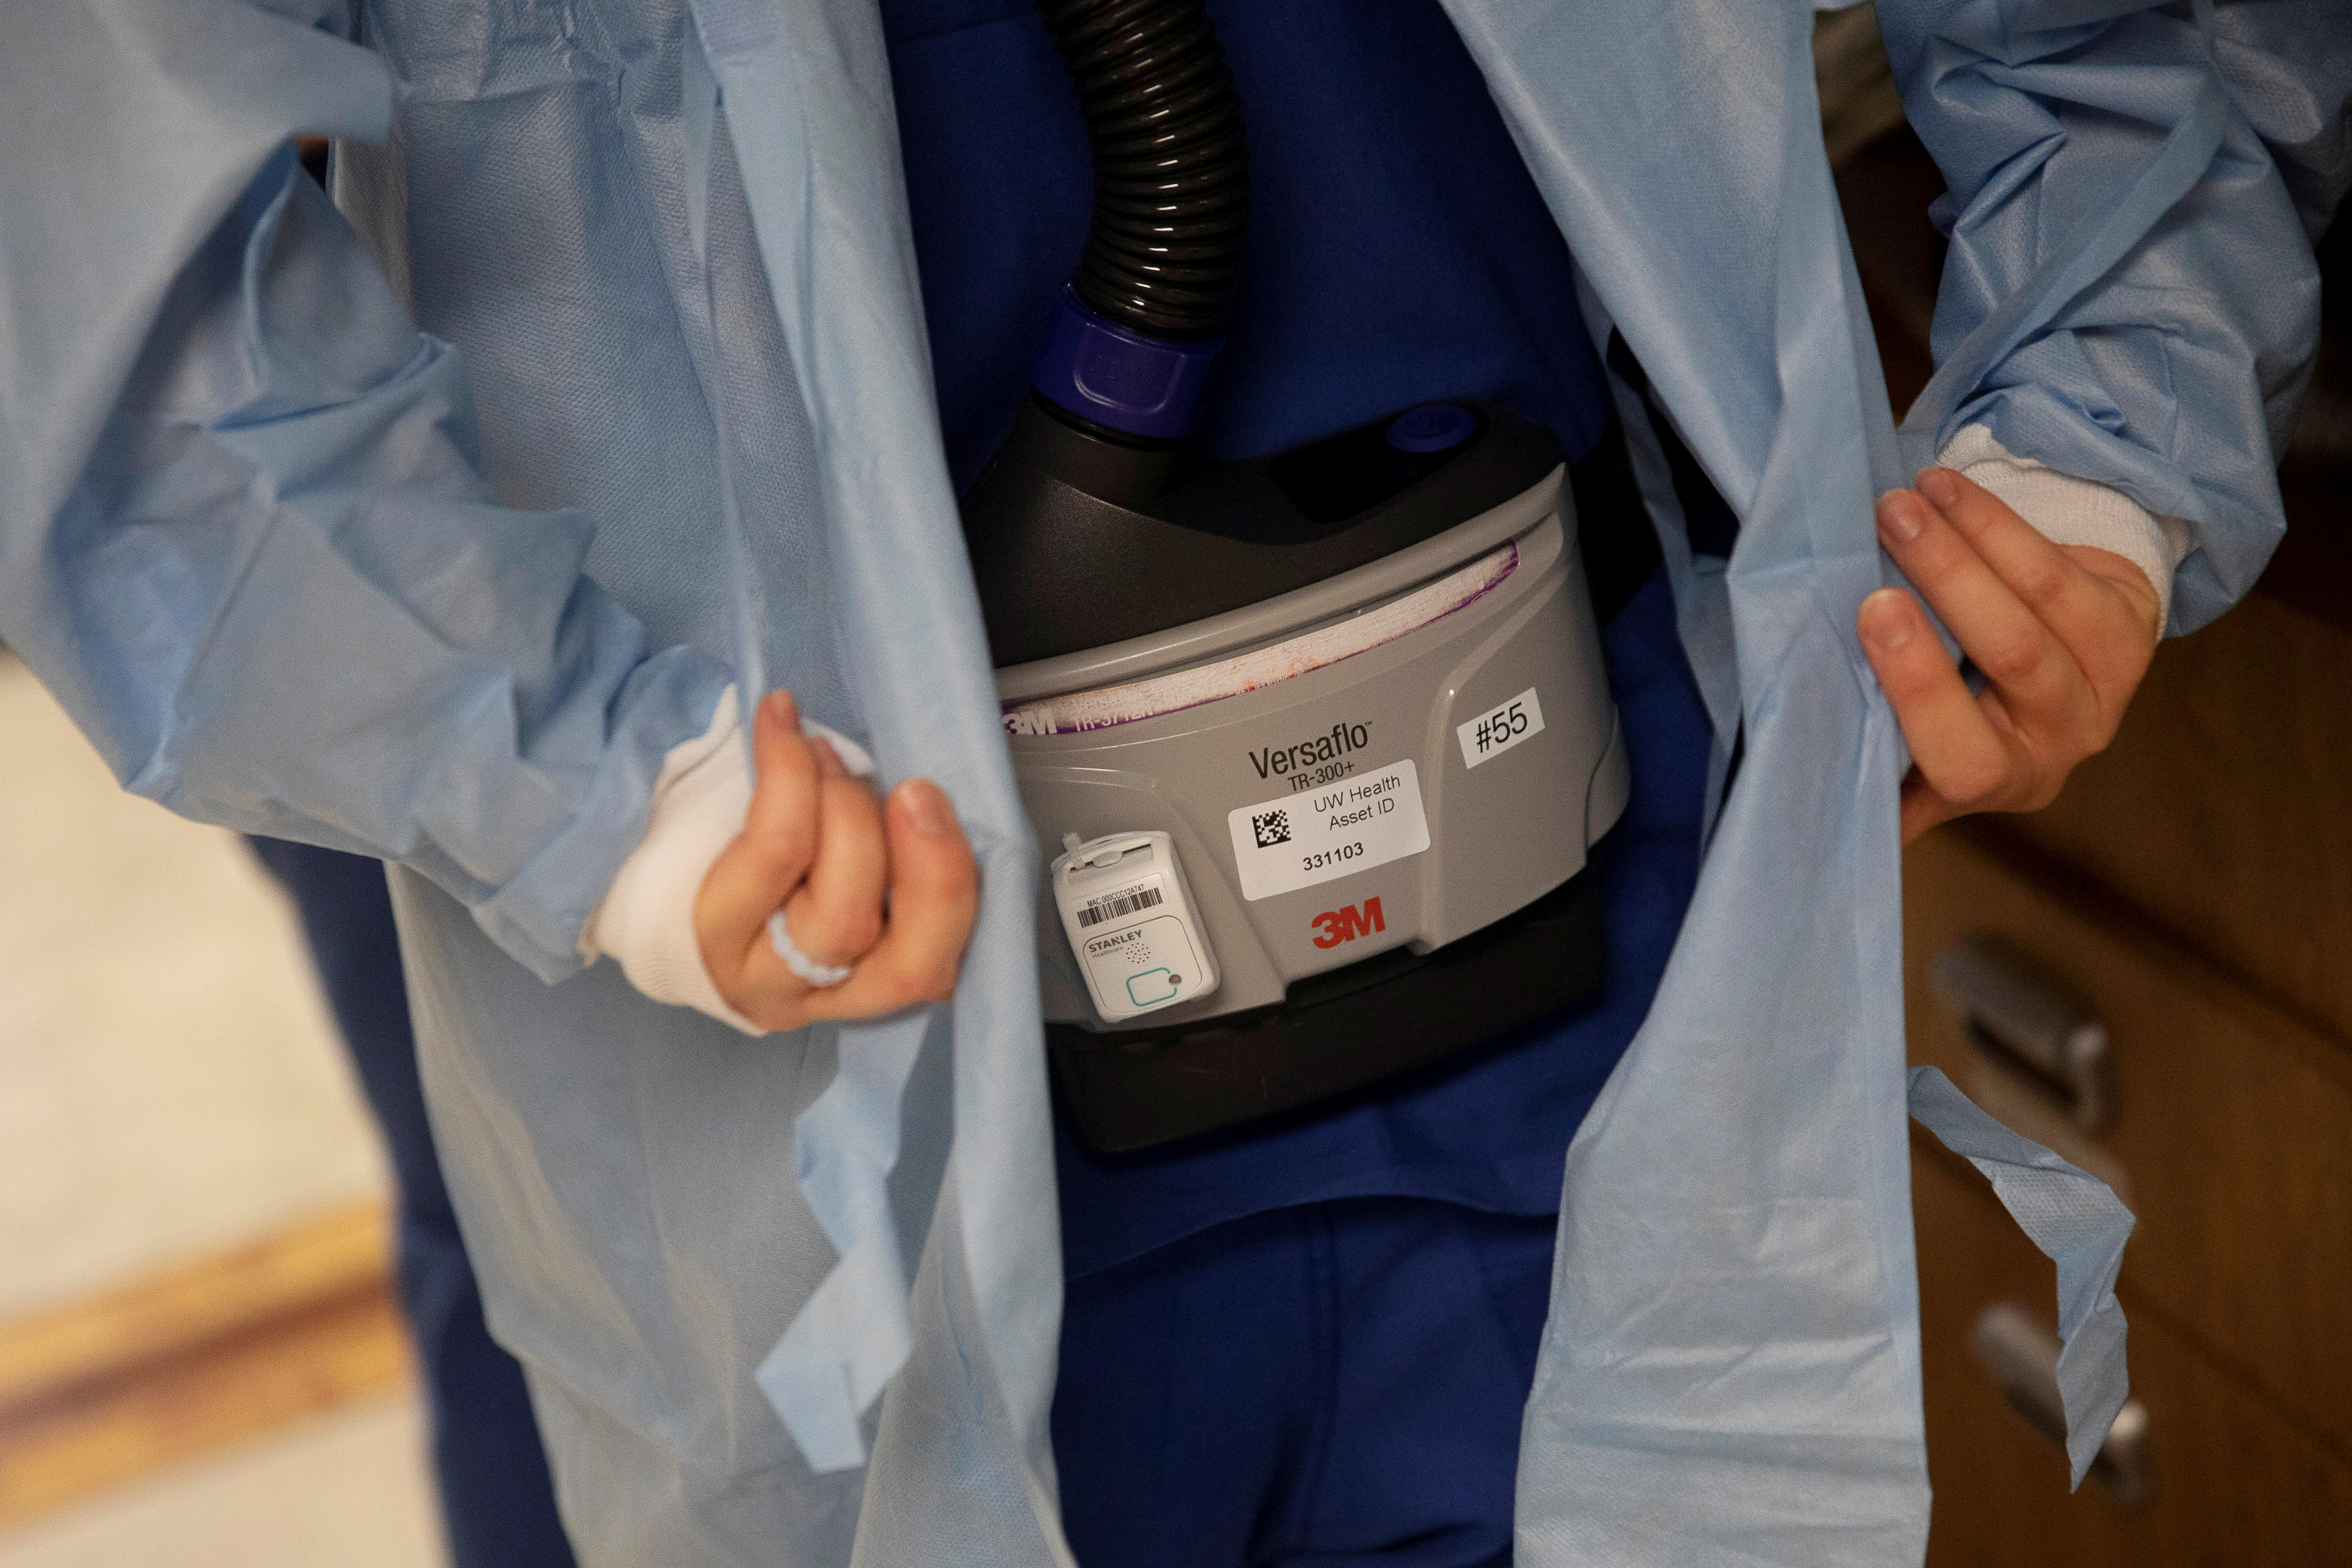 Nursing Assistant Brittany Digman wears a 3M Versaflo TR-300+ powered air purifying respirator as she prepares to enter the room of a coronavirus disease (COVID-19) patient being treated at UW Health University Hospital in Madison, Wisconsin, U.S. November 18, 2020.  REUTERS/Daniel Acker